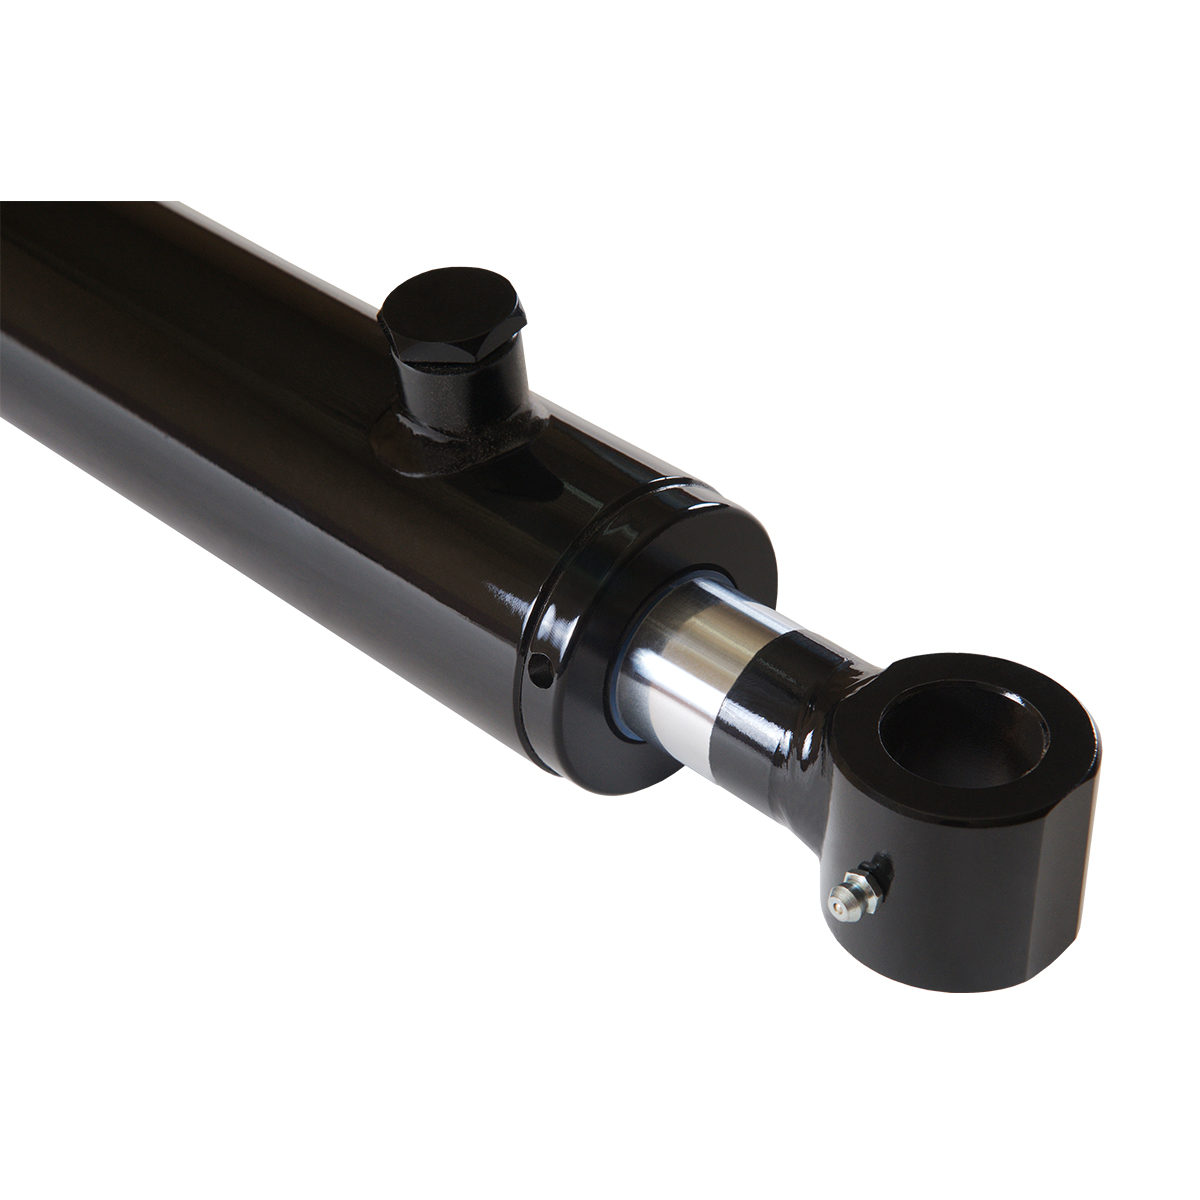 2 bore x 16 stroke hydraulic cylinder, welded tang double acting cylinder | Magister Hydraulics